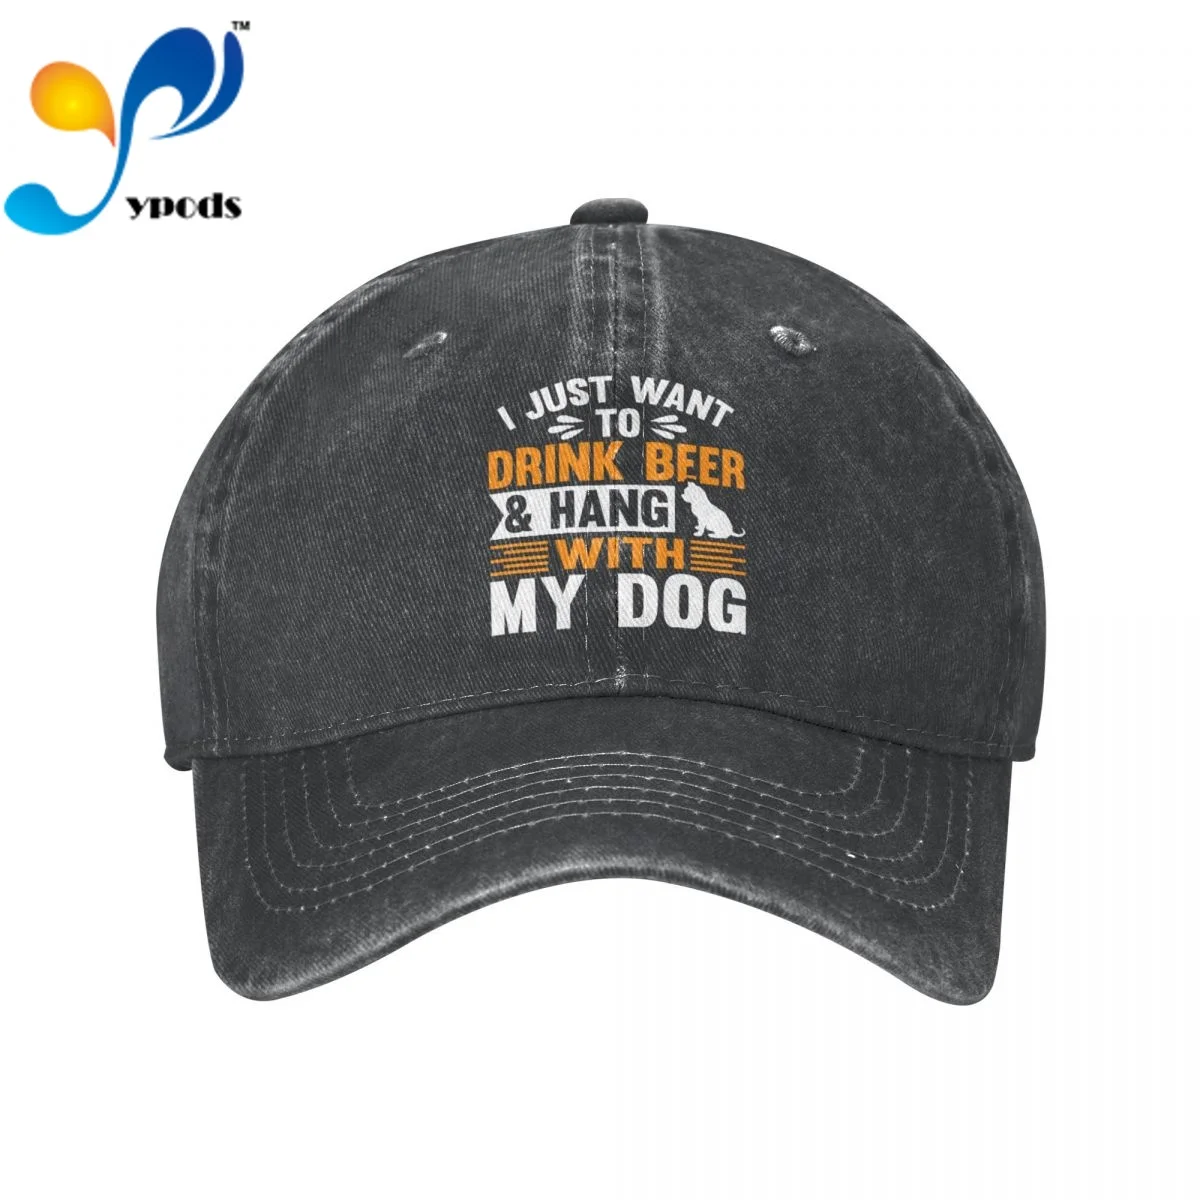 

I Just Want To Drink-Beer And Hang With My Dog Cotton Cap For Men Women Gorras Snapback Caps Baseball Caps Casquette Dad Hat